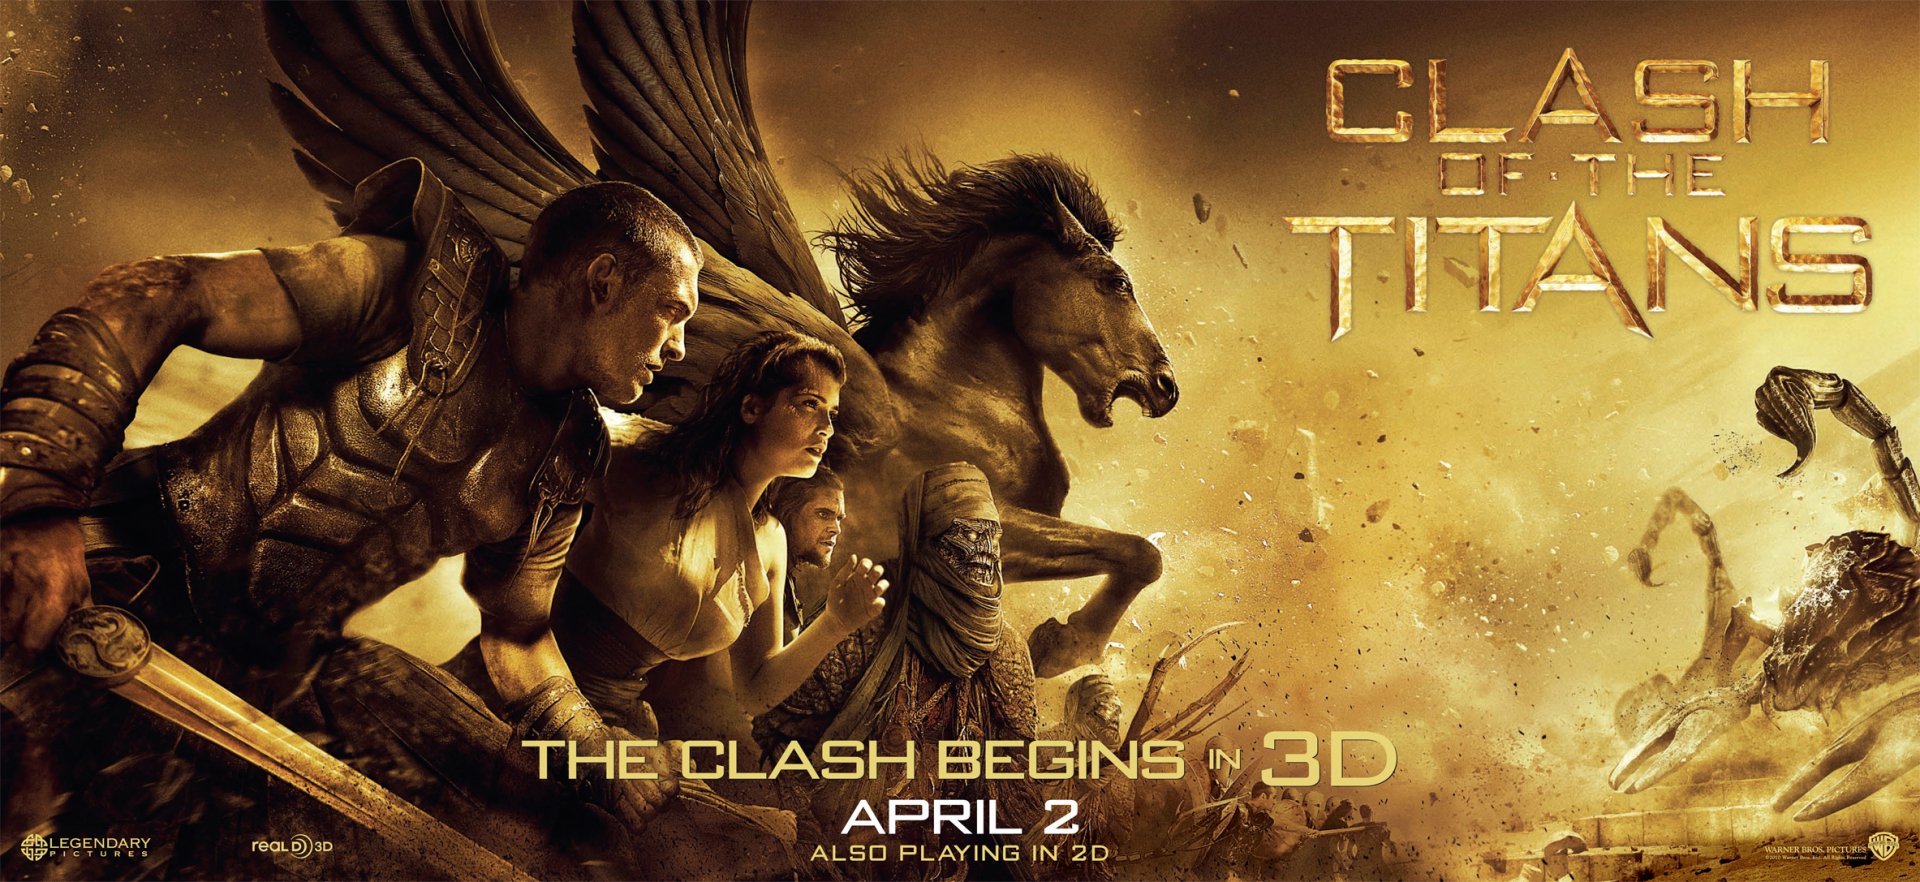 30+ Clash Of The Titans (2010) HD Wallpapers and Backgrounds